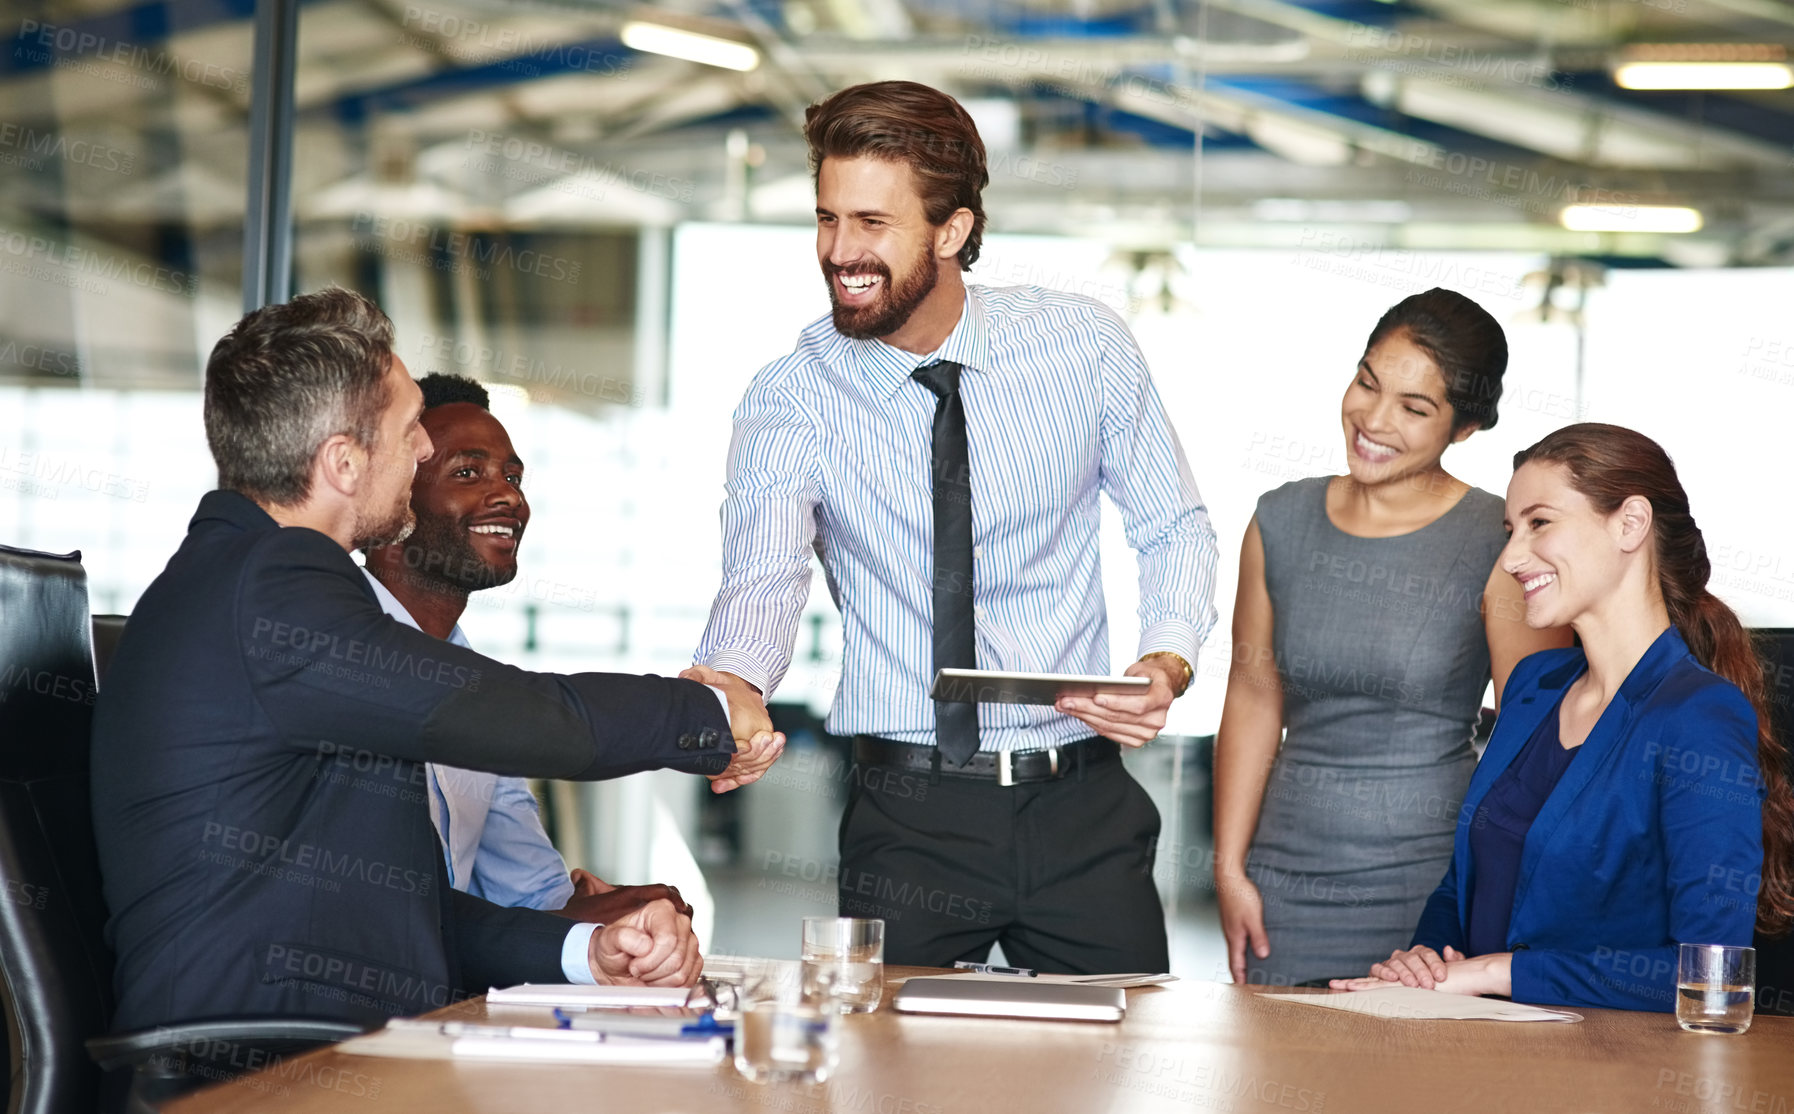 Buy stock photo Shot of two businesspeople shaking hands while in a meeting with colleagues